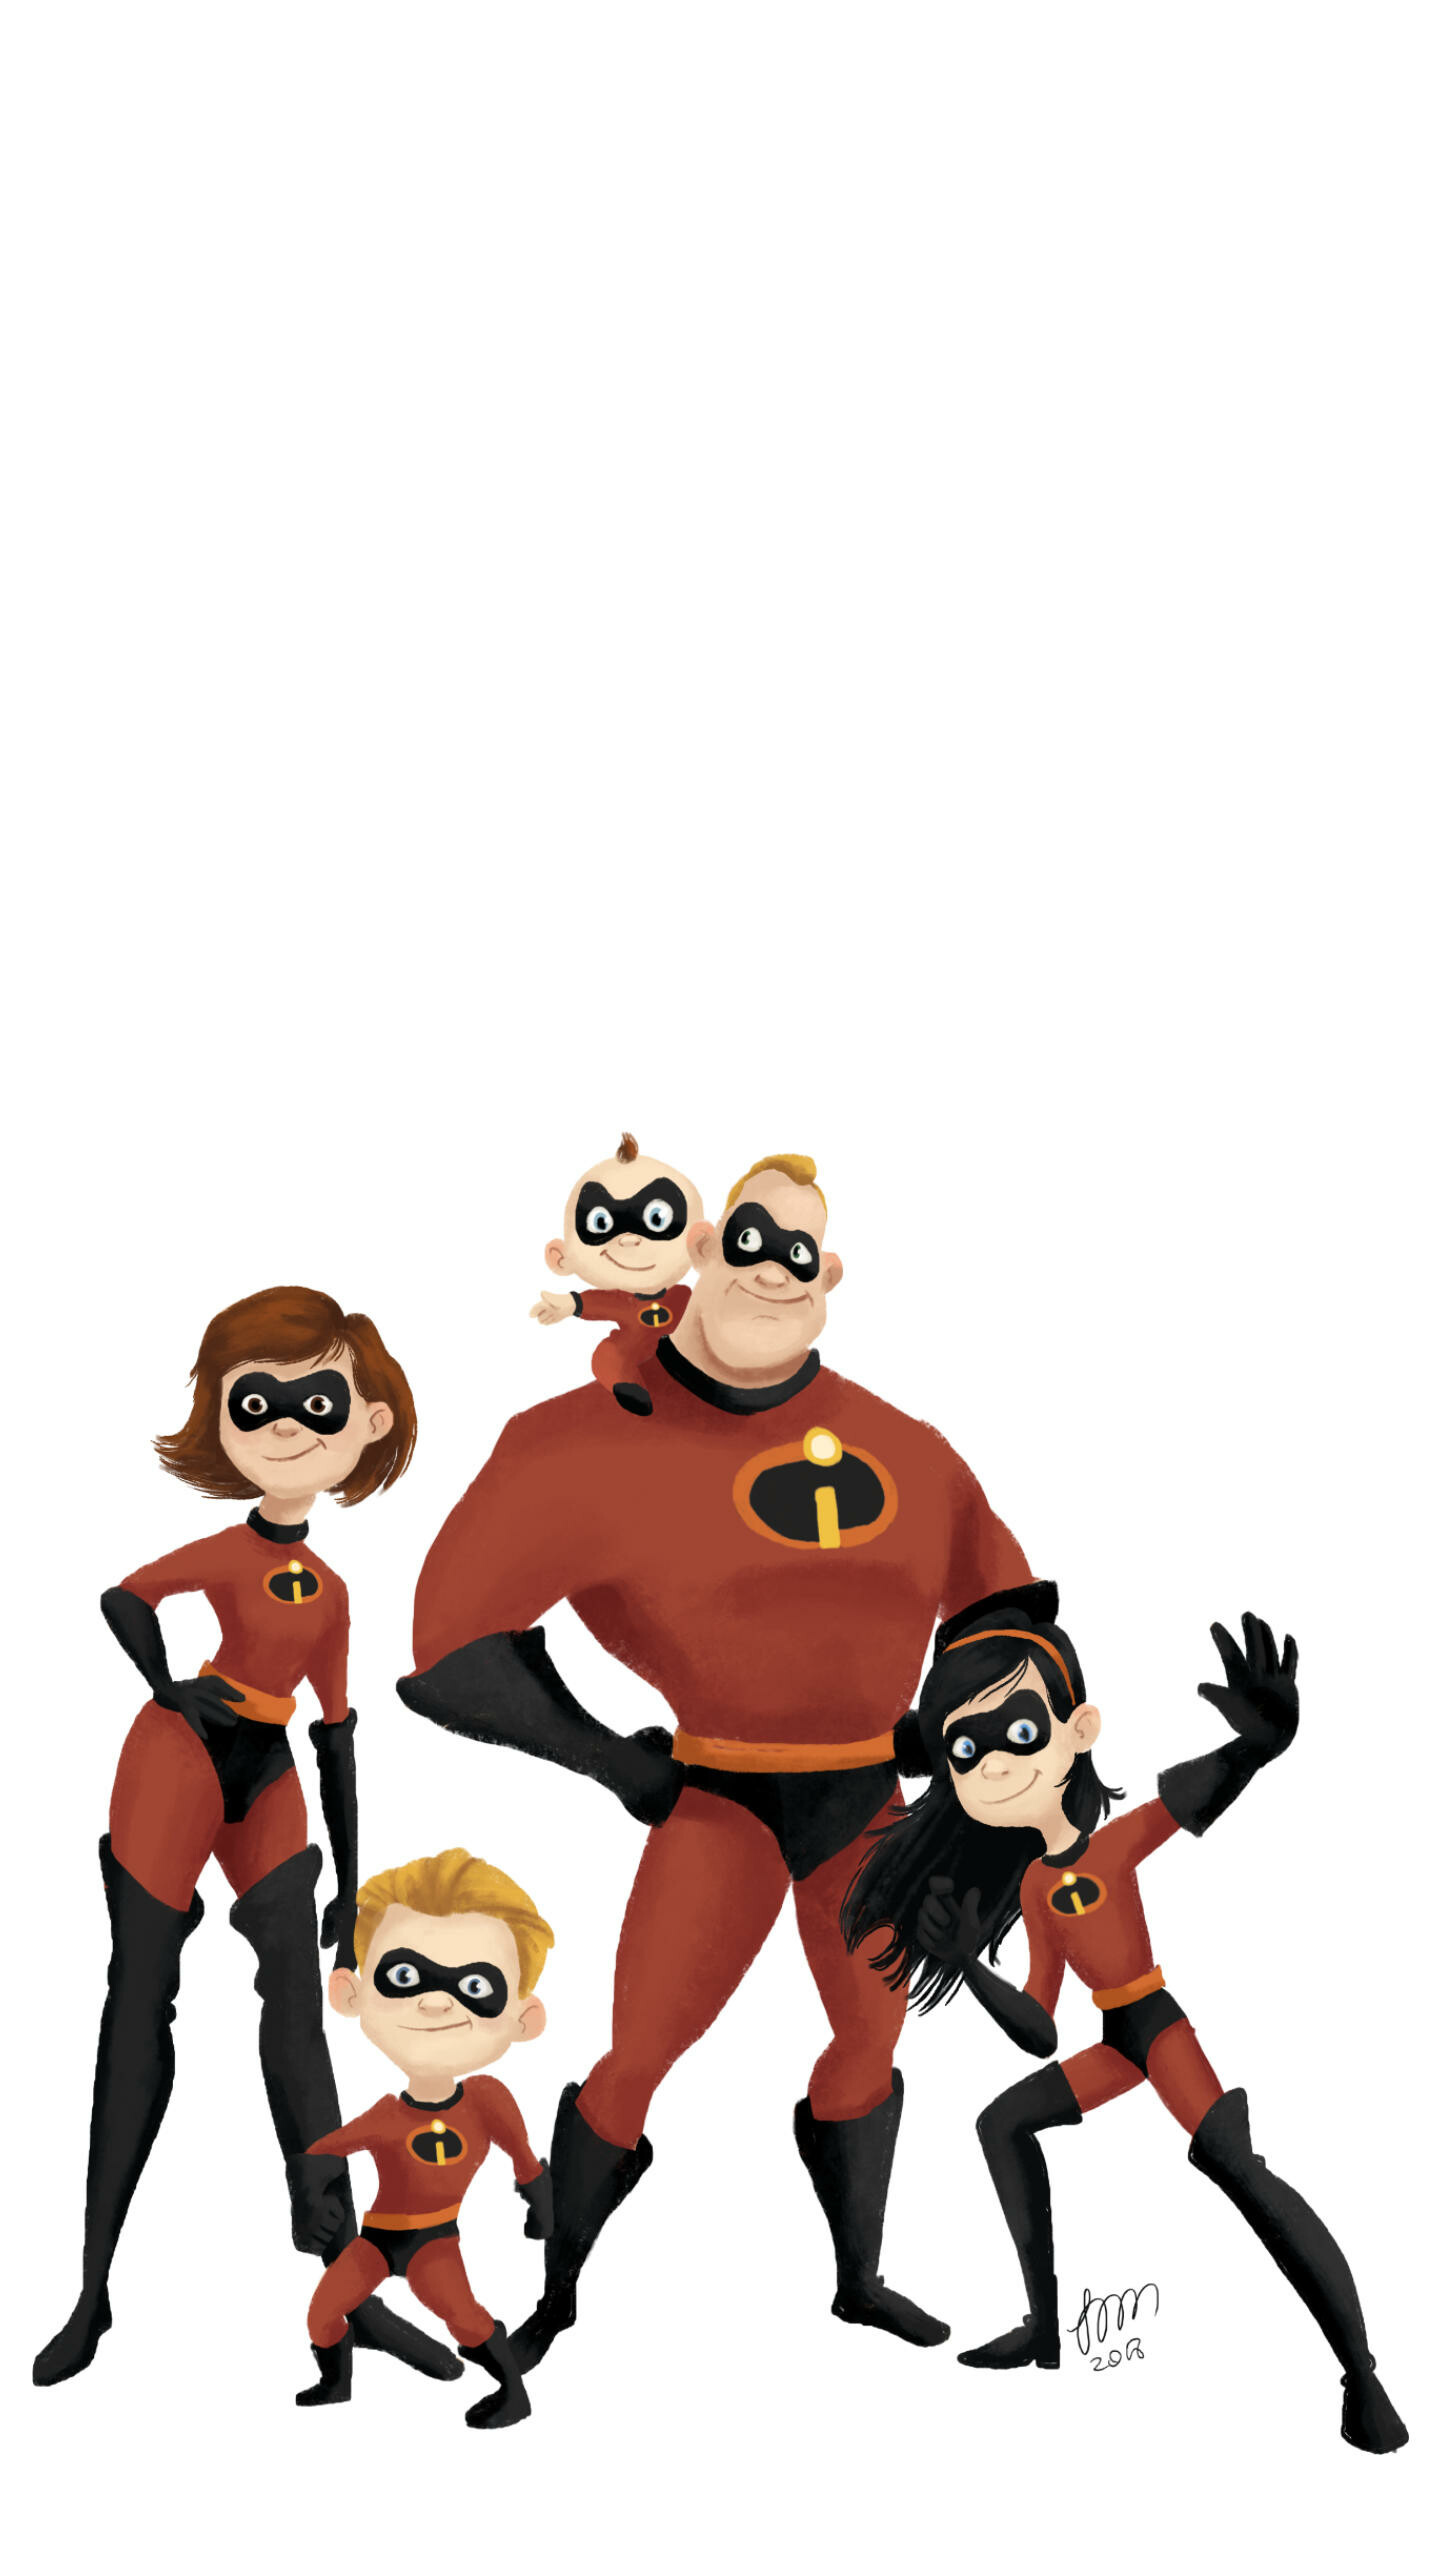 The Incredibles: An animated cartoon following superheroes who hide their powers in accordance with a government mandate and attempt to live a quiet suburban life with their three children. 1440x2560 HD Background.